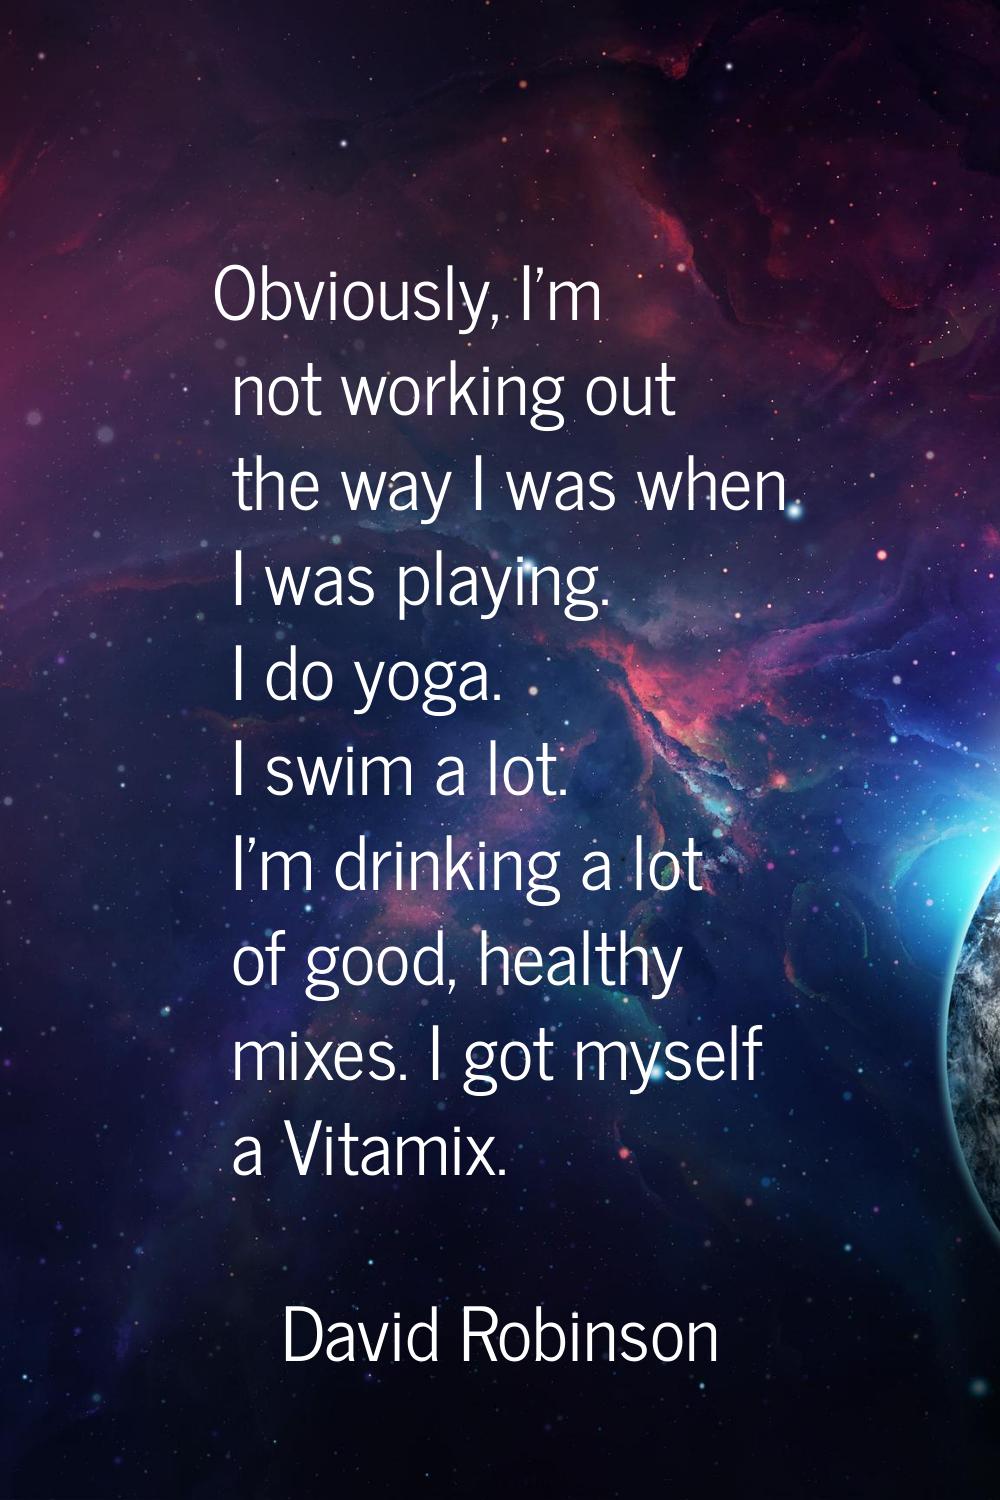 Obviously, I'm not working out the way I was when I was playing. I do yoga. I swim a lot. I'm drink